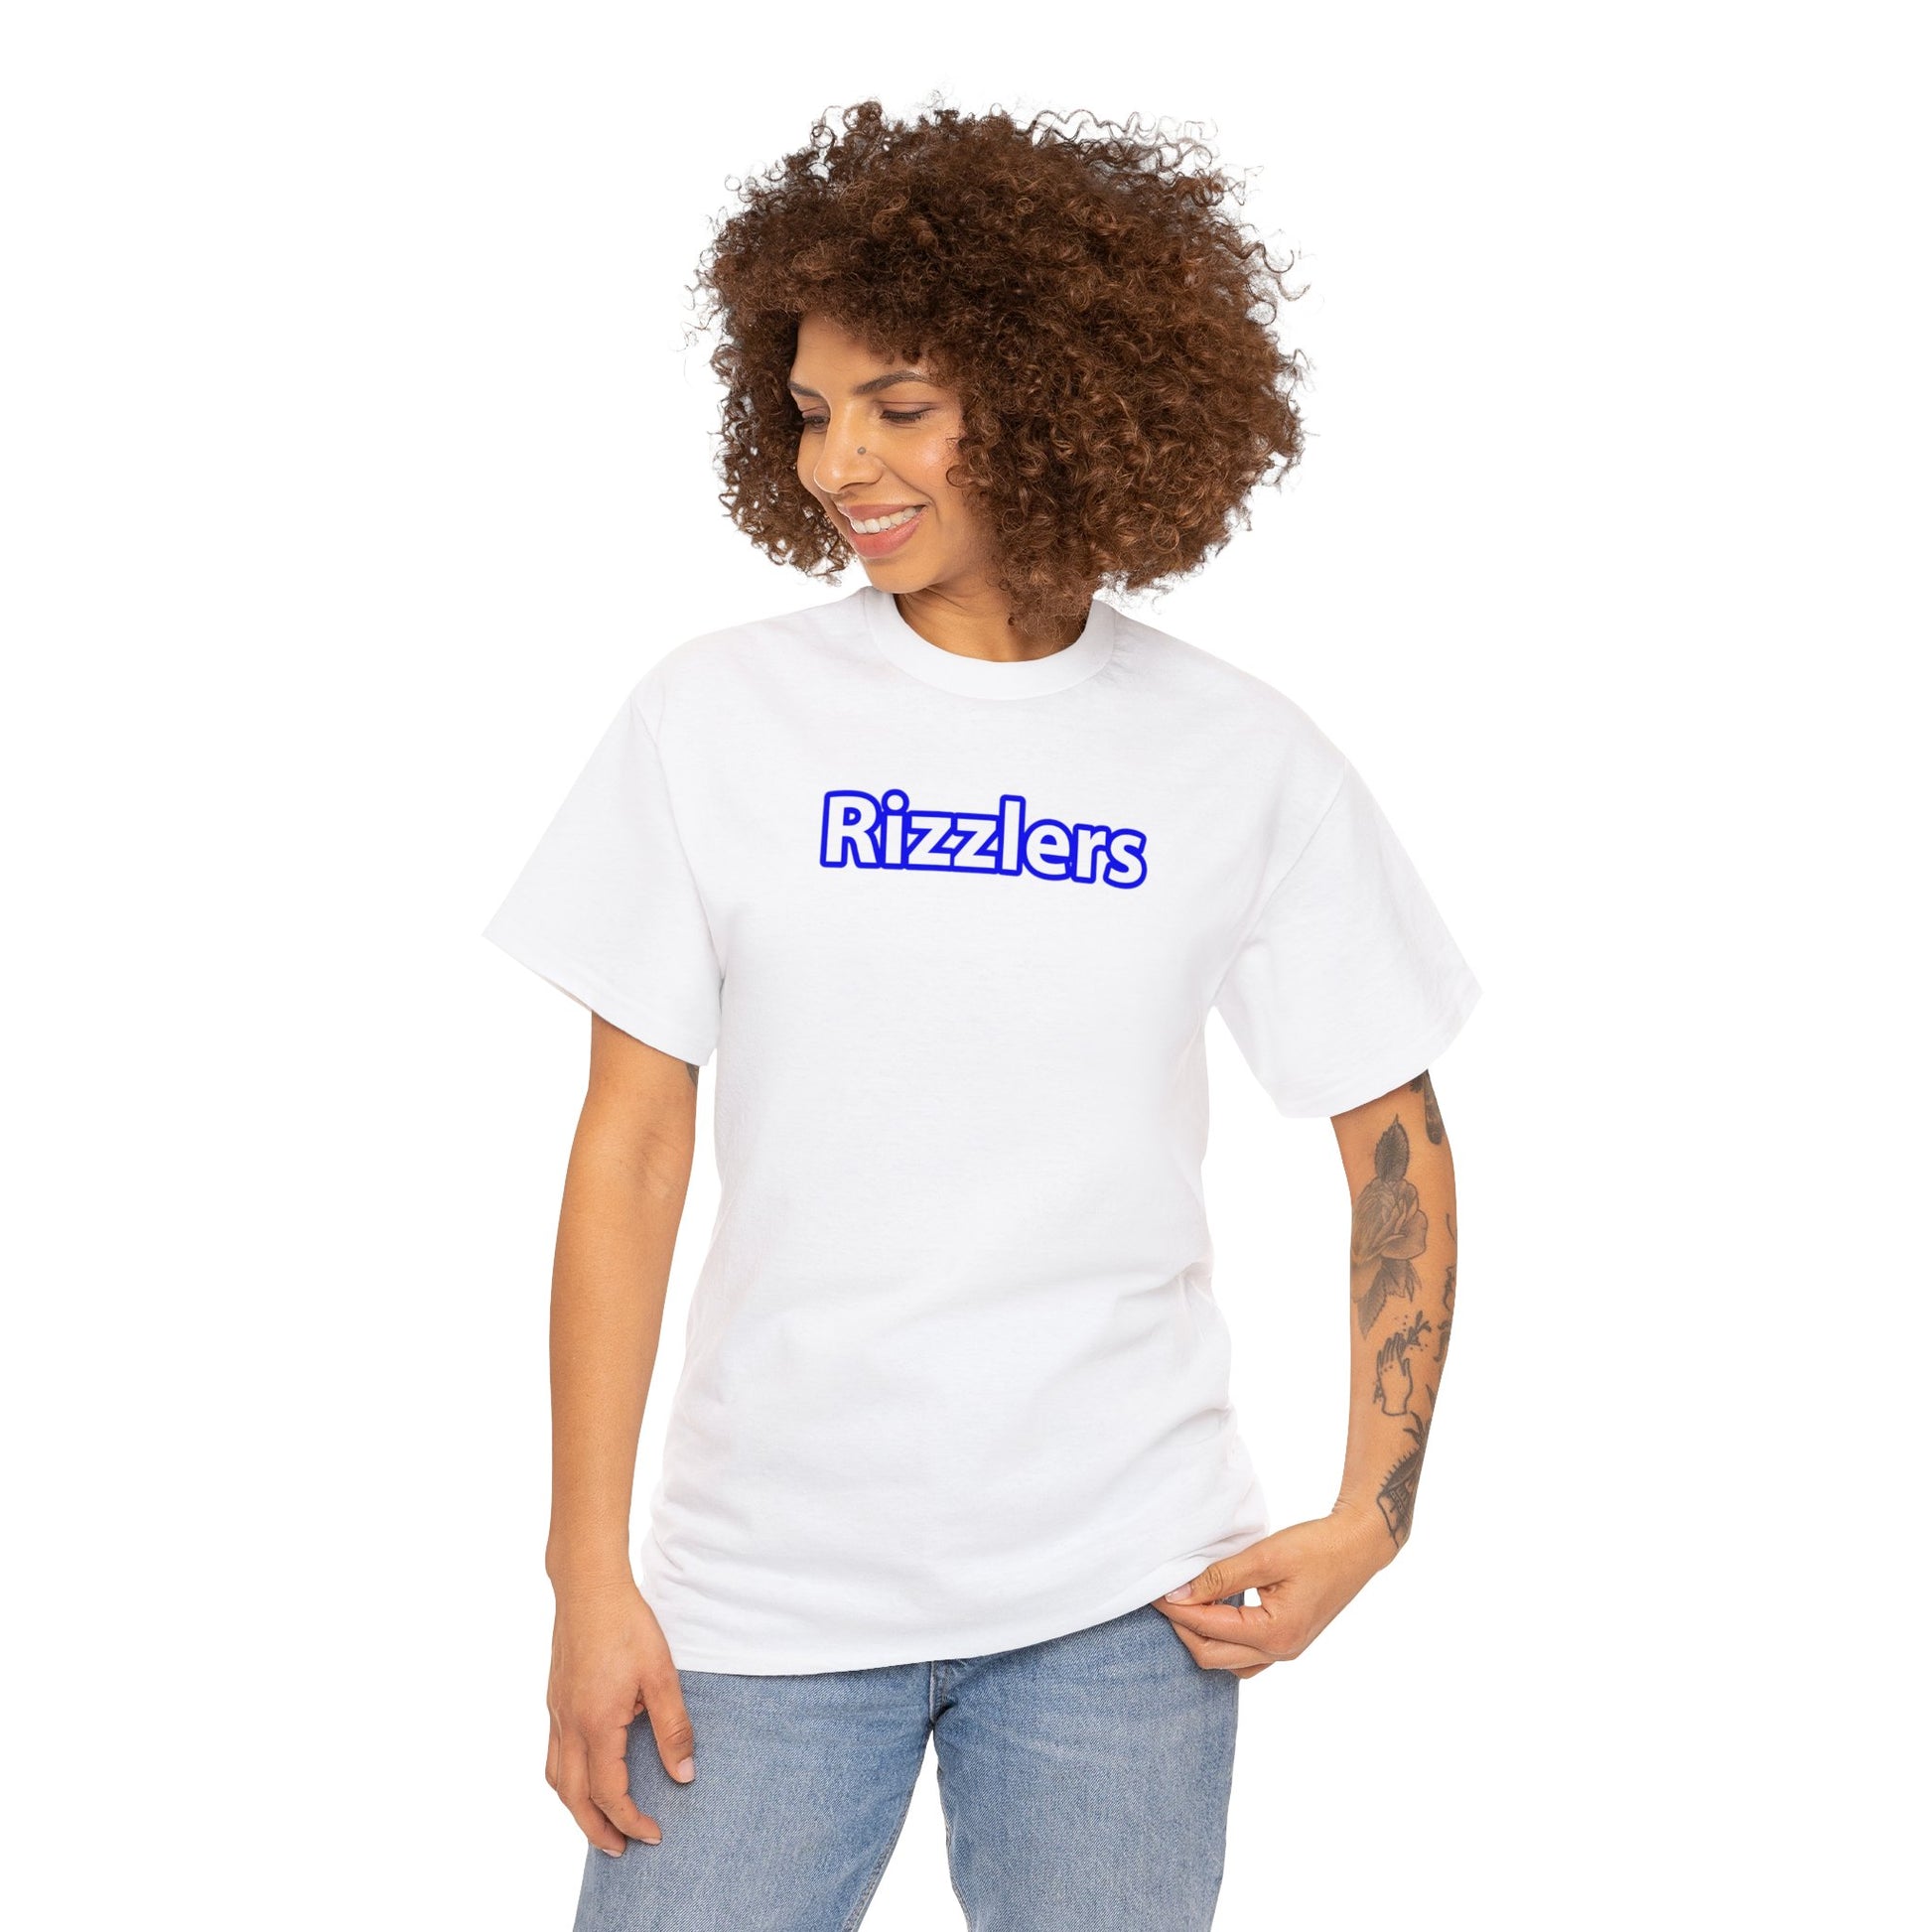 Rizzlers Tee